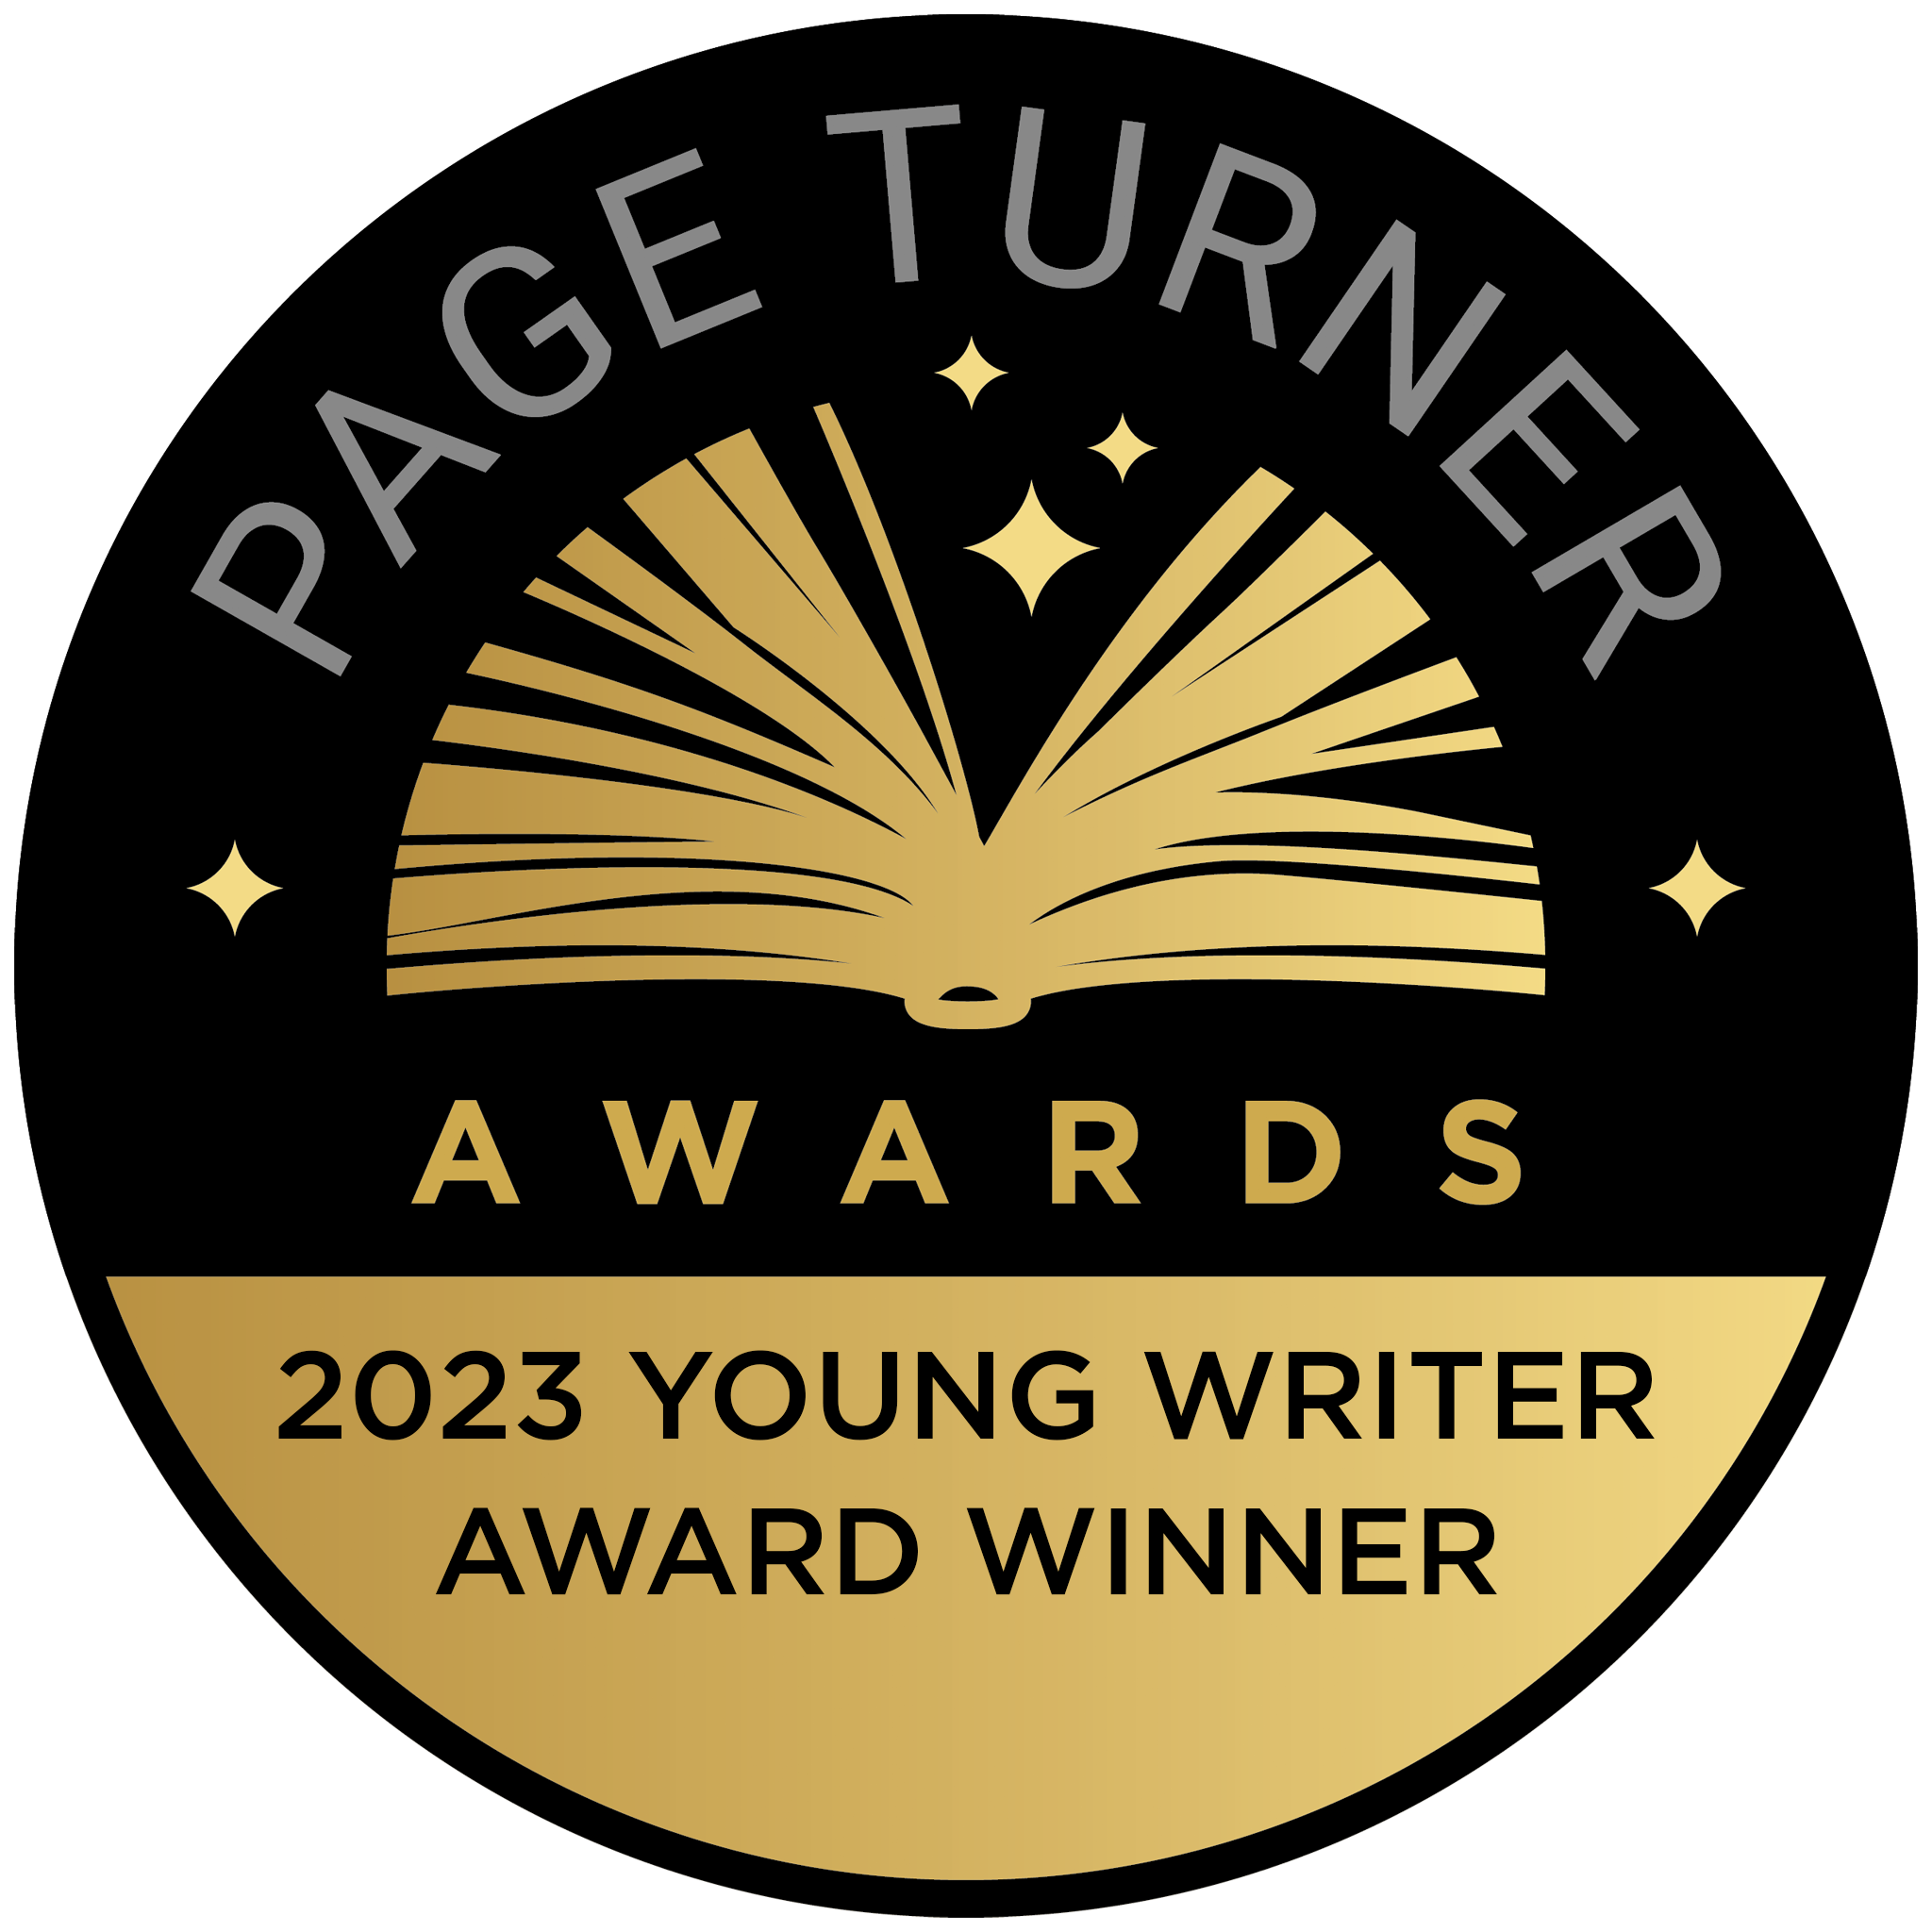 YOUNG WRITER AWARD - 2023 WRITING AWARD - 2048x2048 - Page Turner Awards Brand Badge By Kent Wynne (C) copy (1)